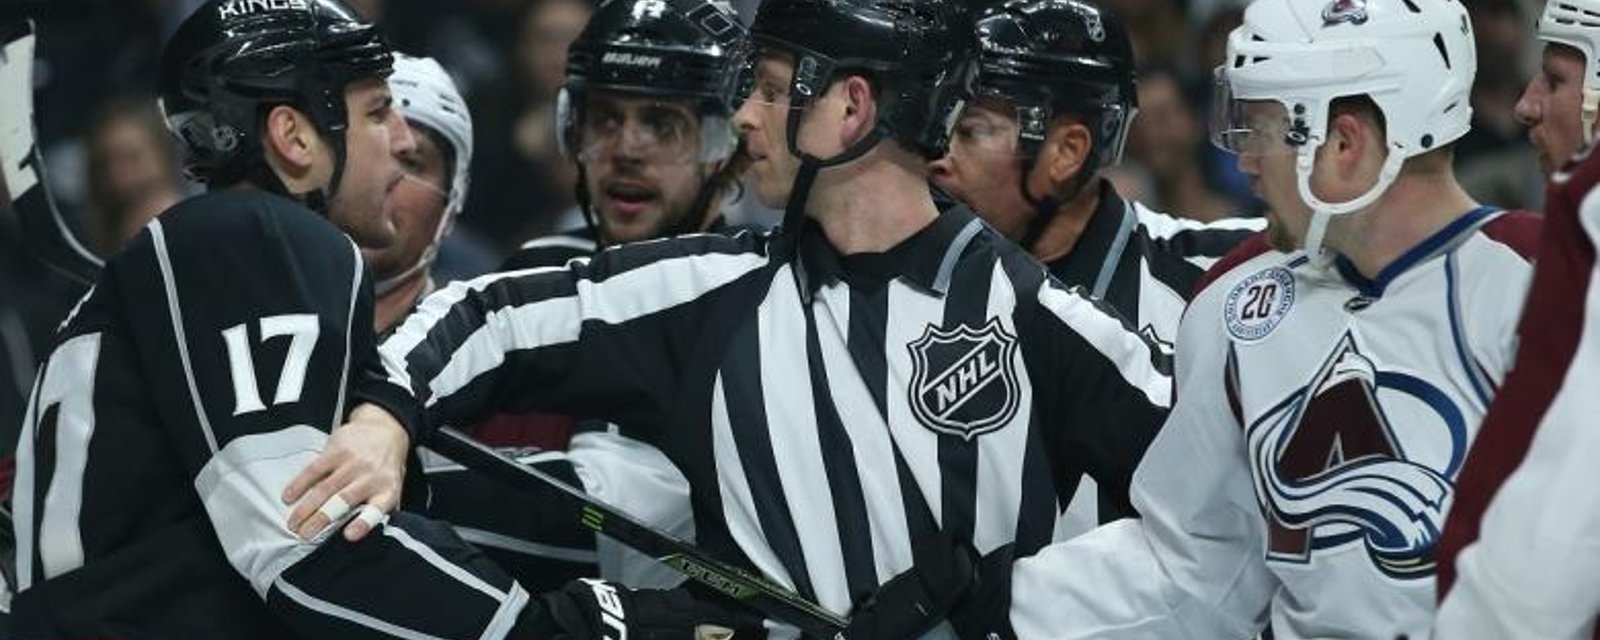 Milan Lucic punches a linesman right in the mouth.